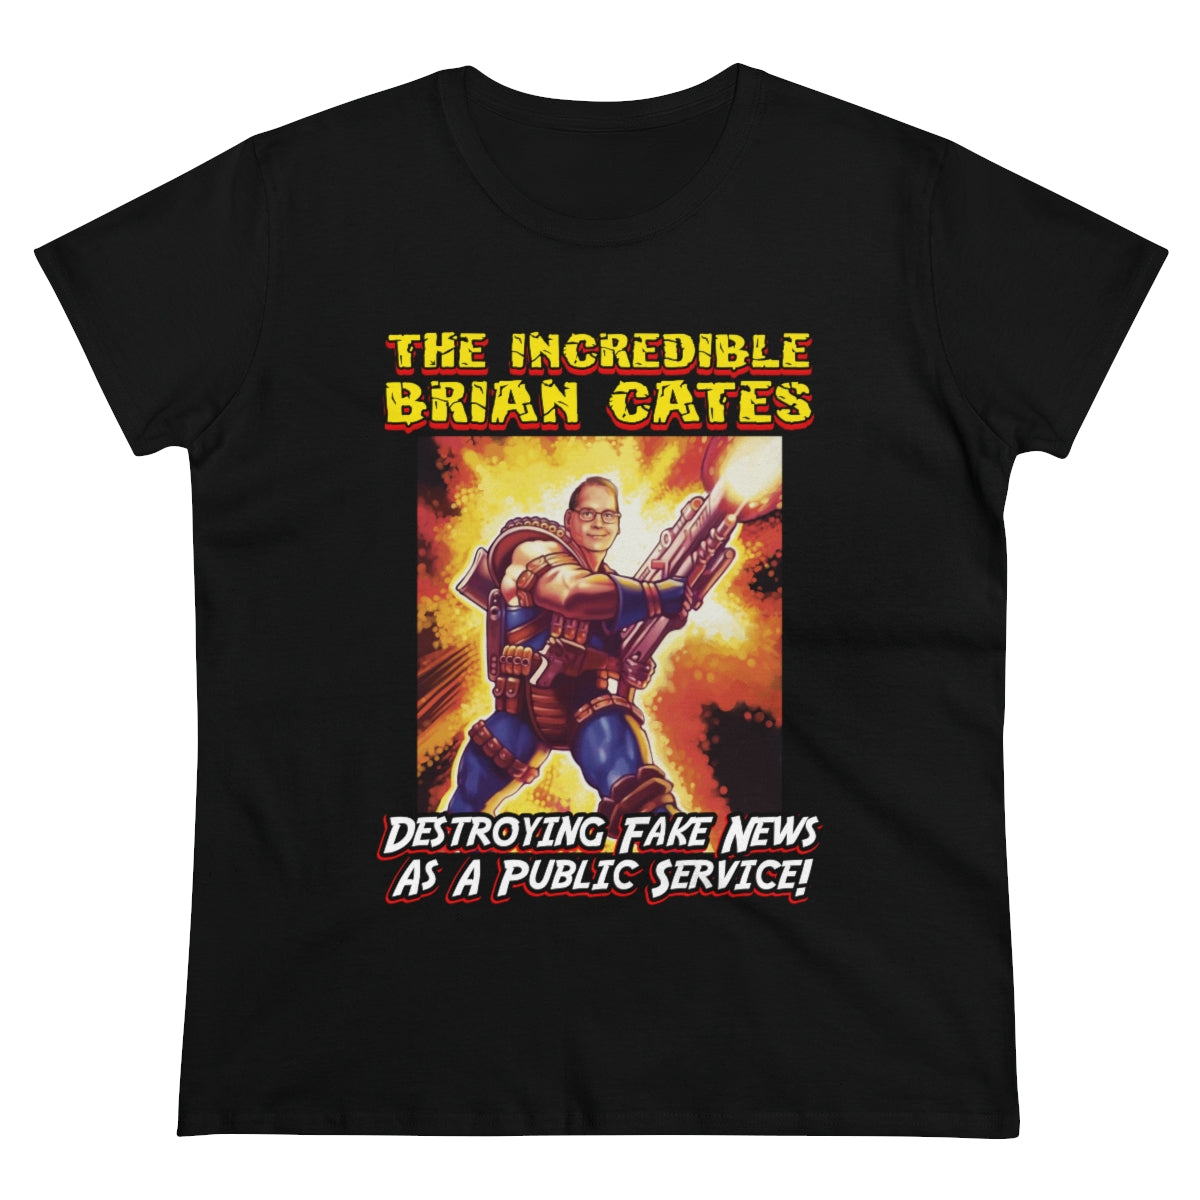 The Incredible Brian Cates | Women's Tee - Rise of The New Media